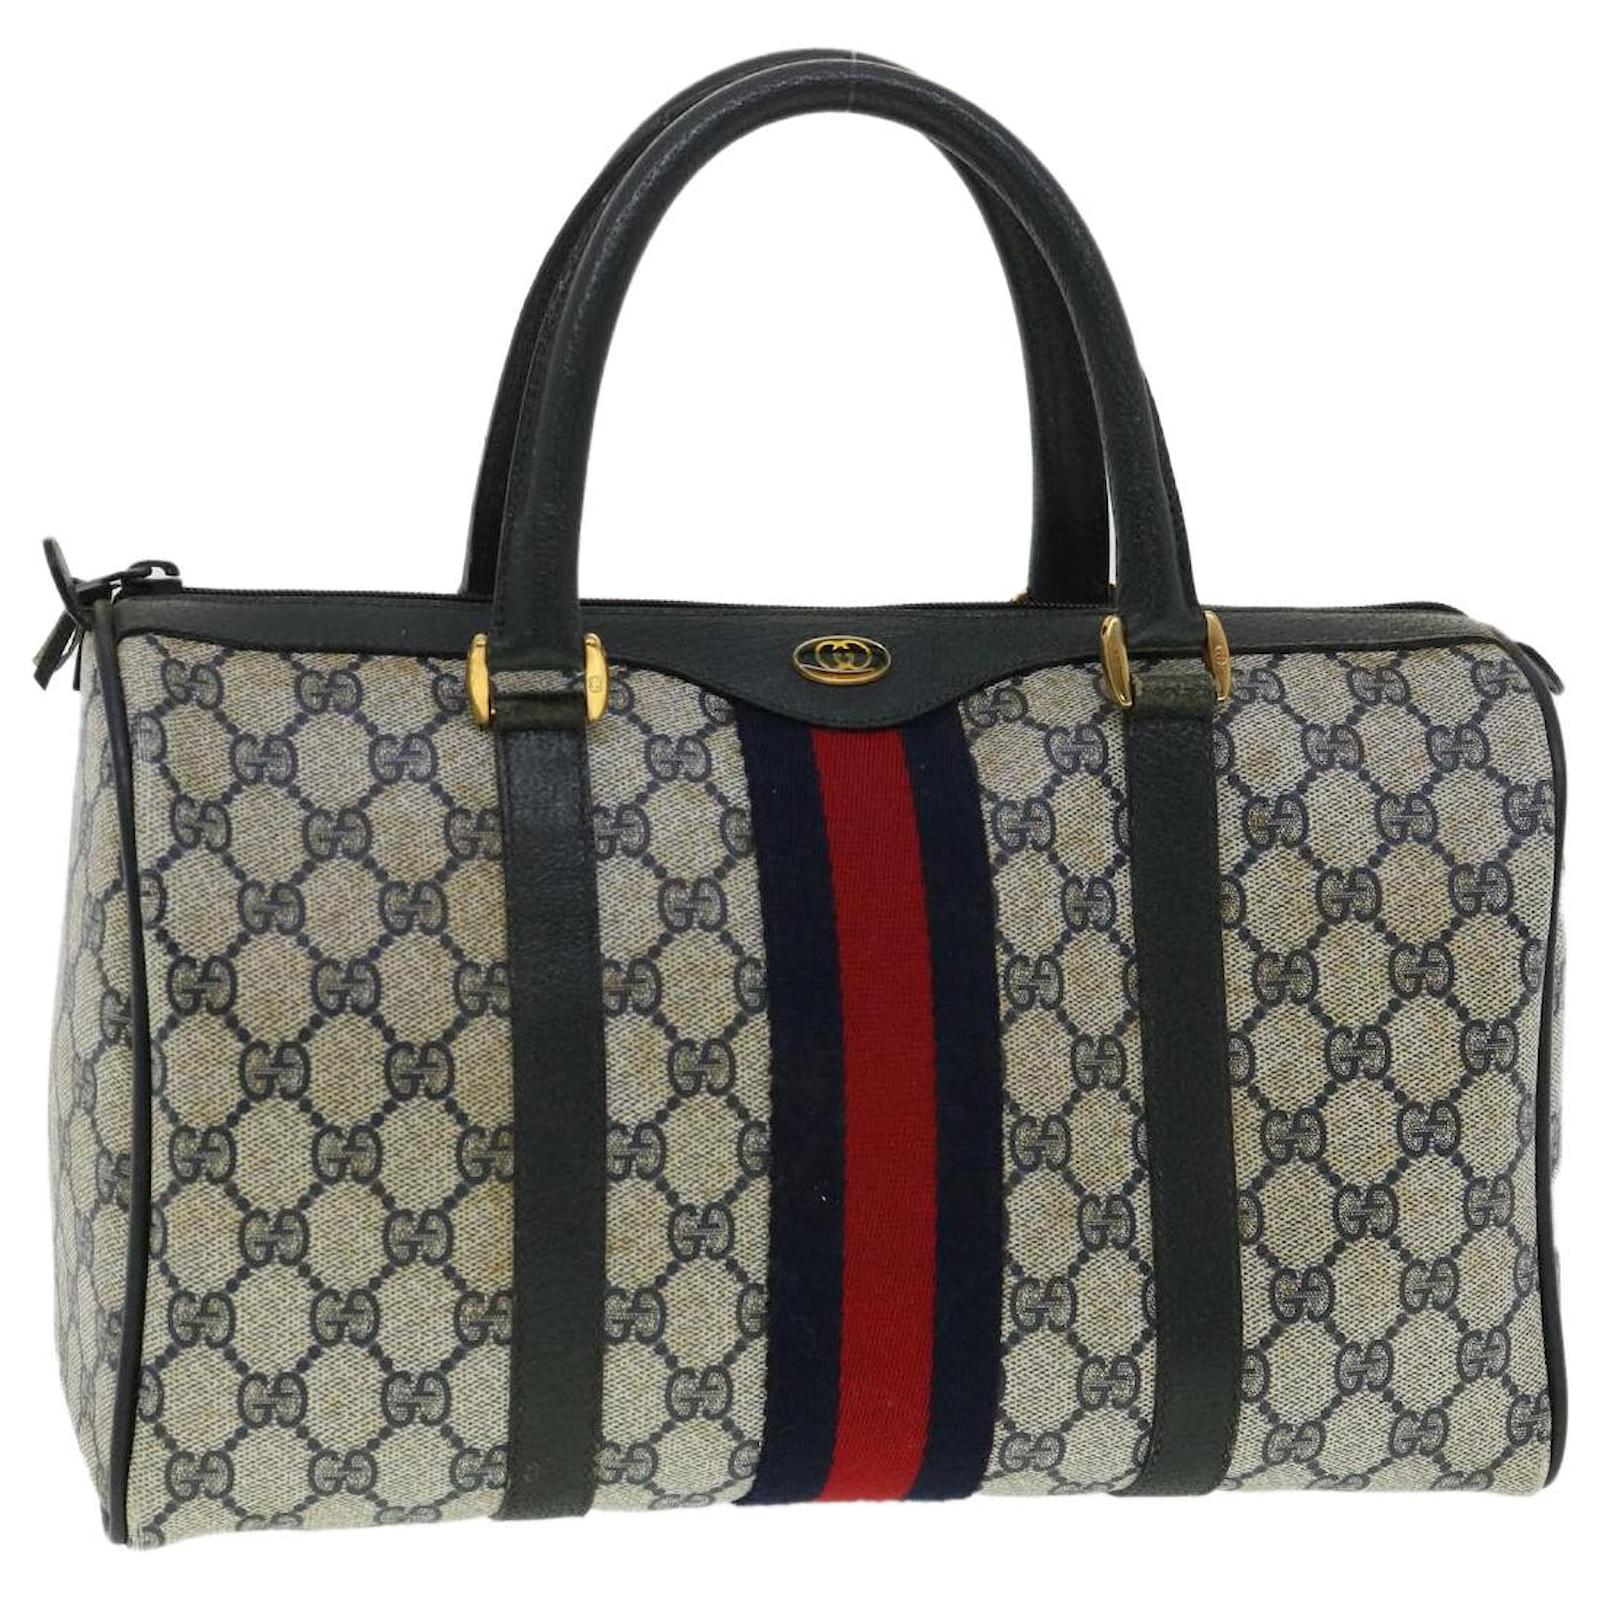 GUCCI GG Supreme Sherry tote bag PVC leather Navy Blue Large